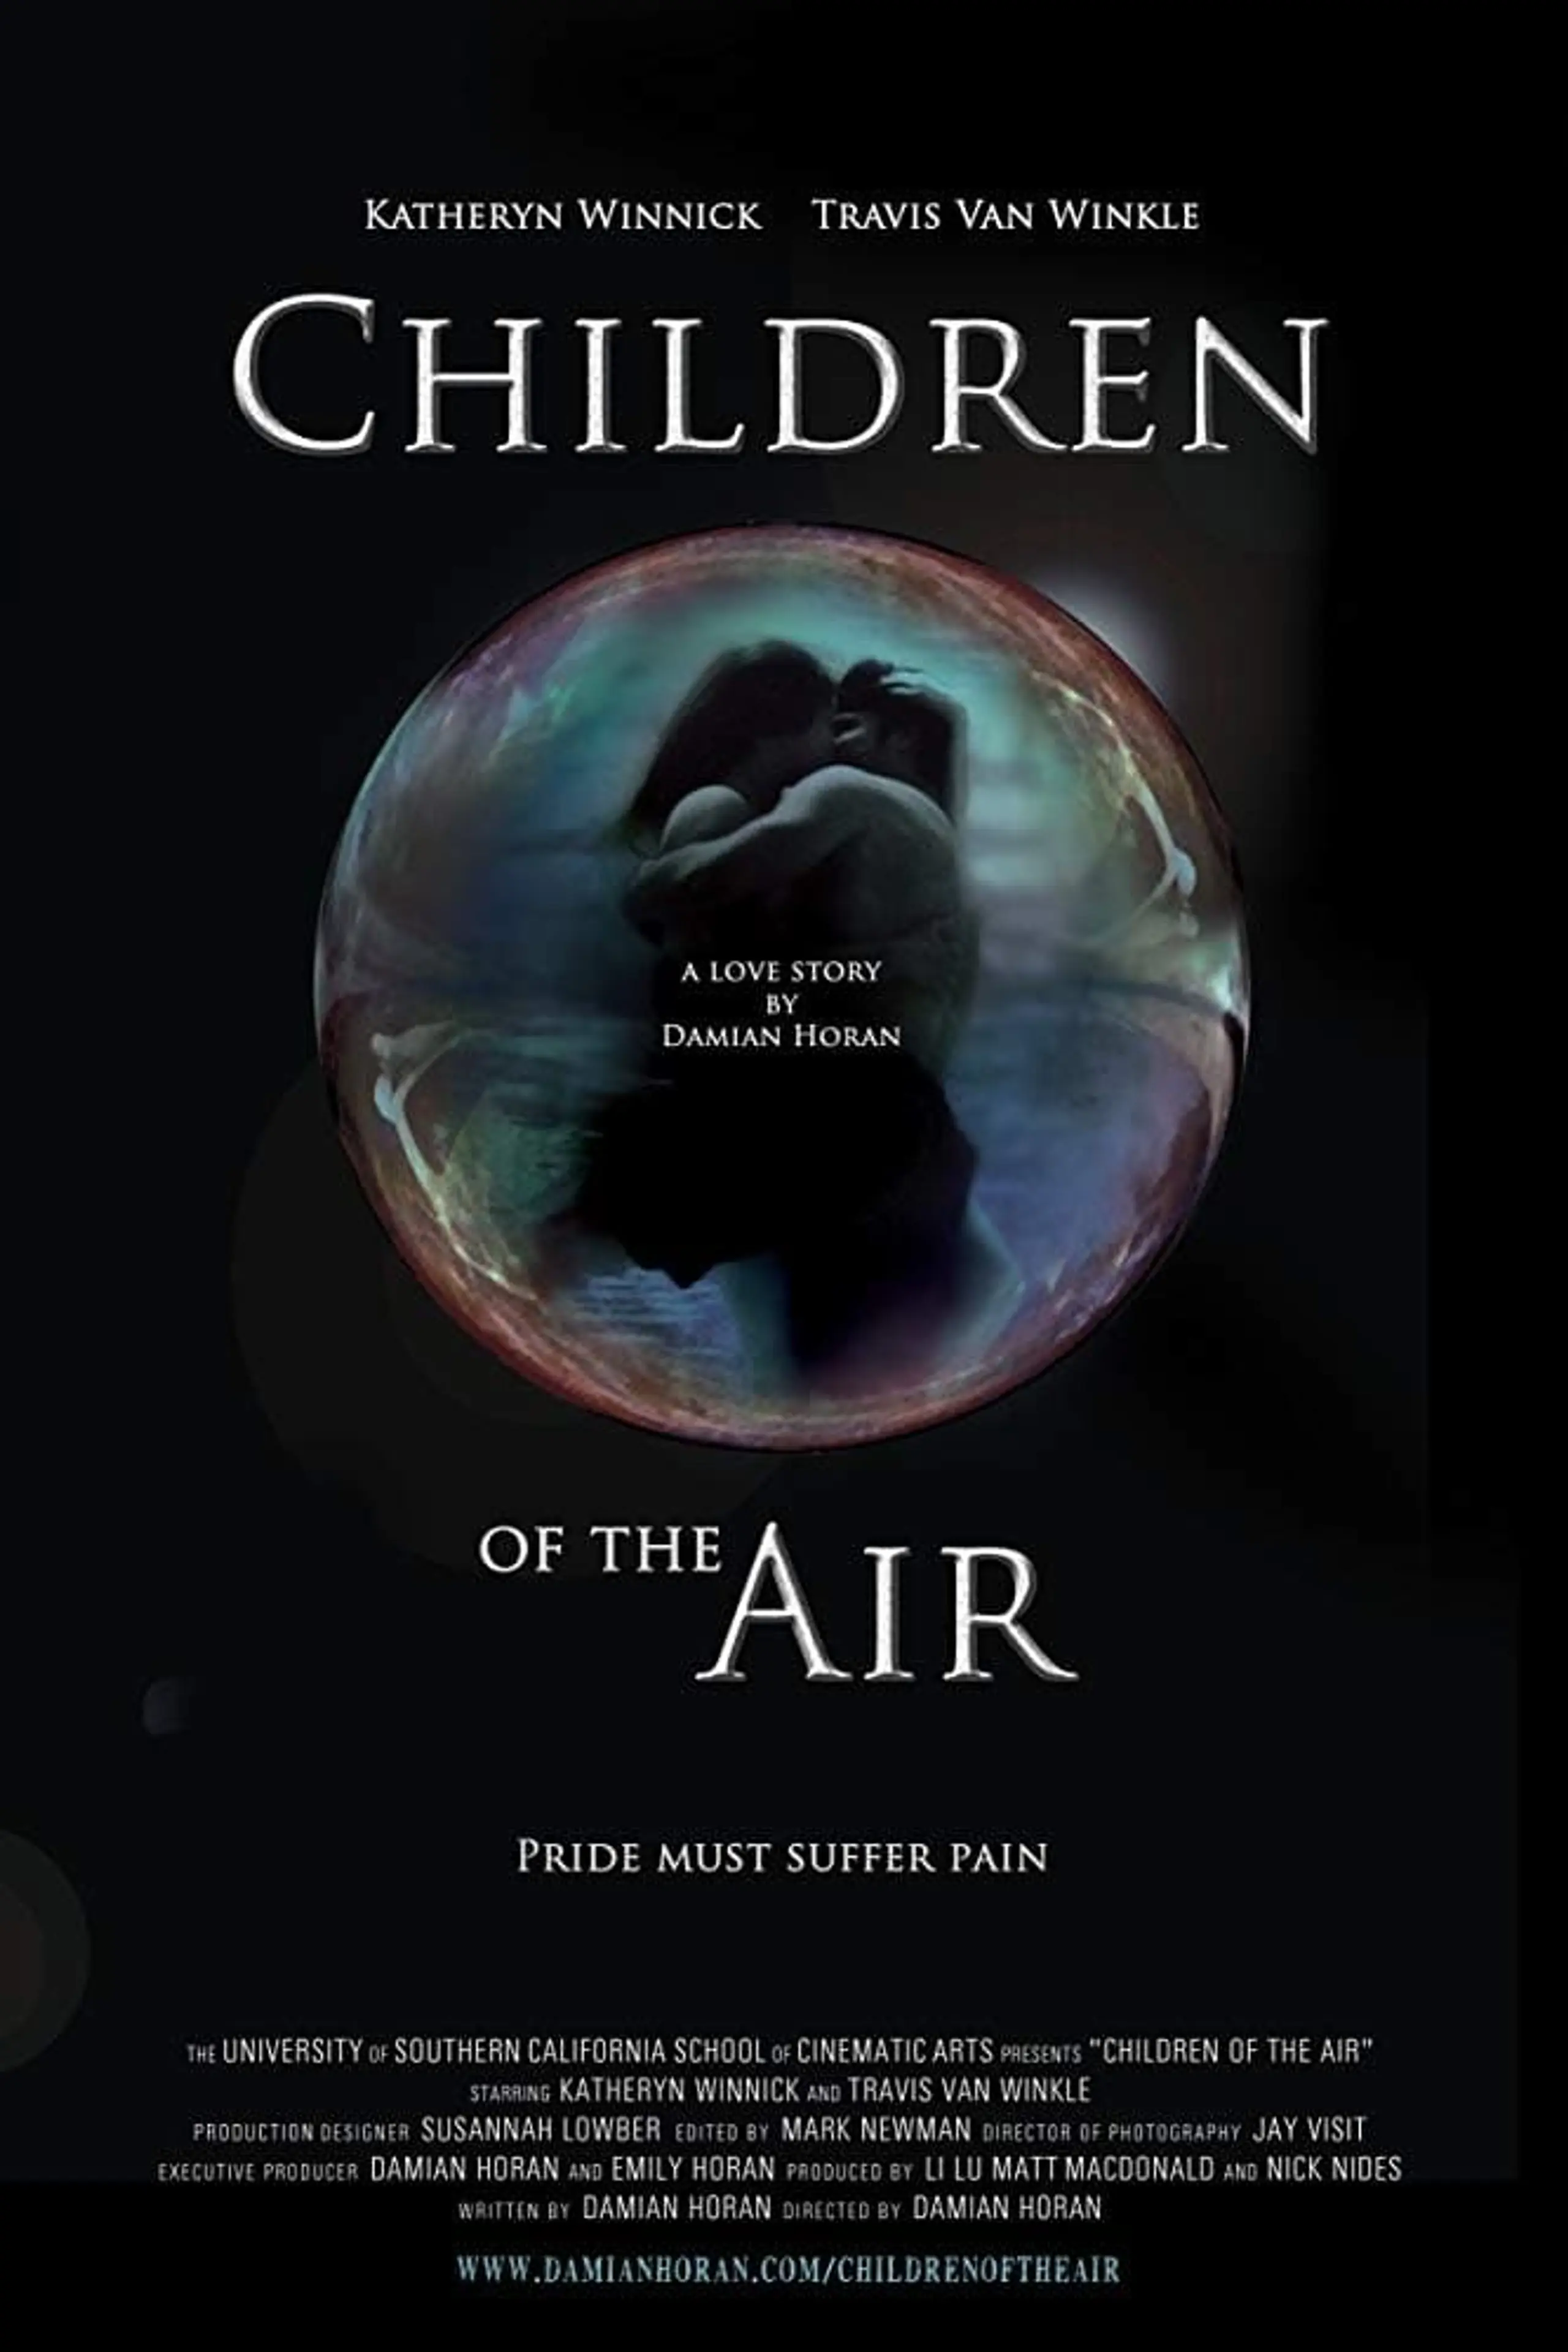 Children of the Air